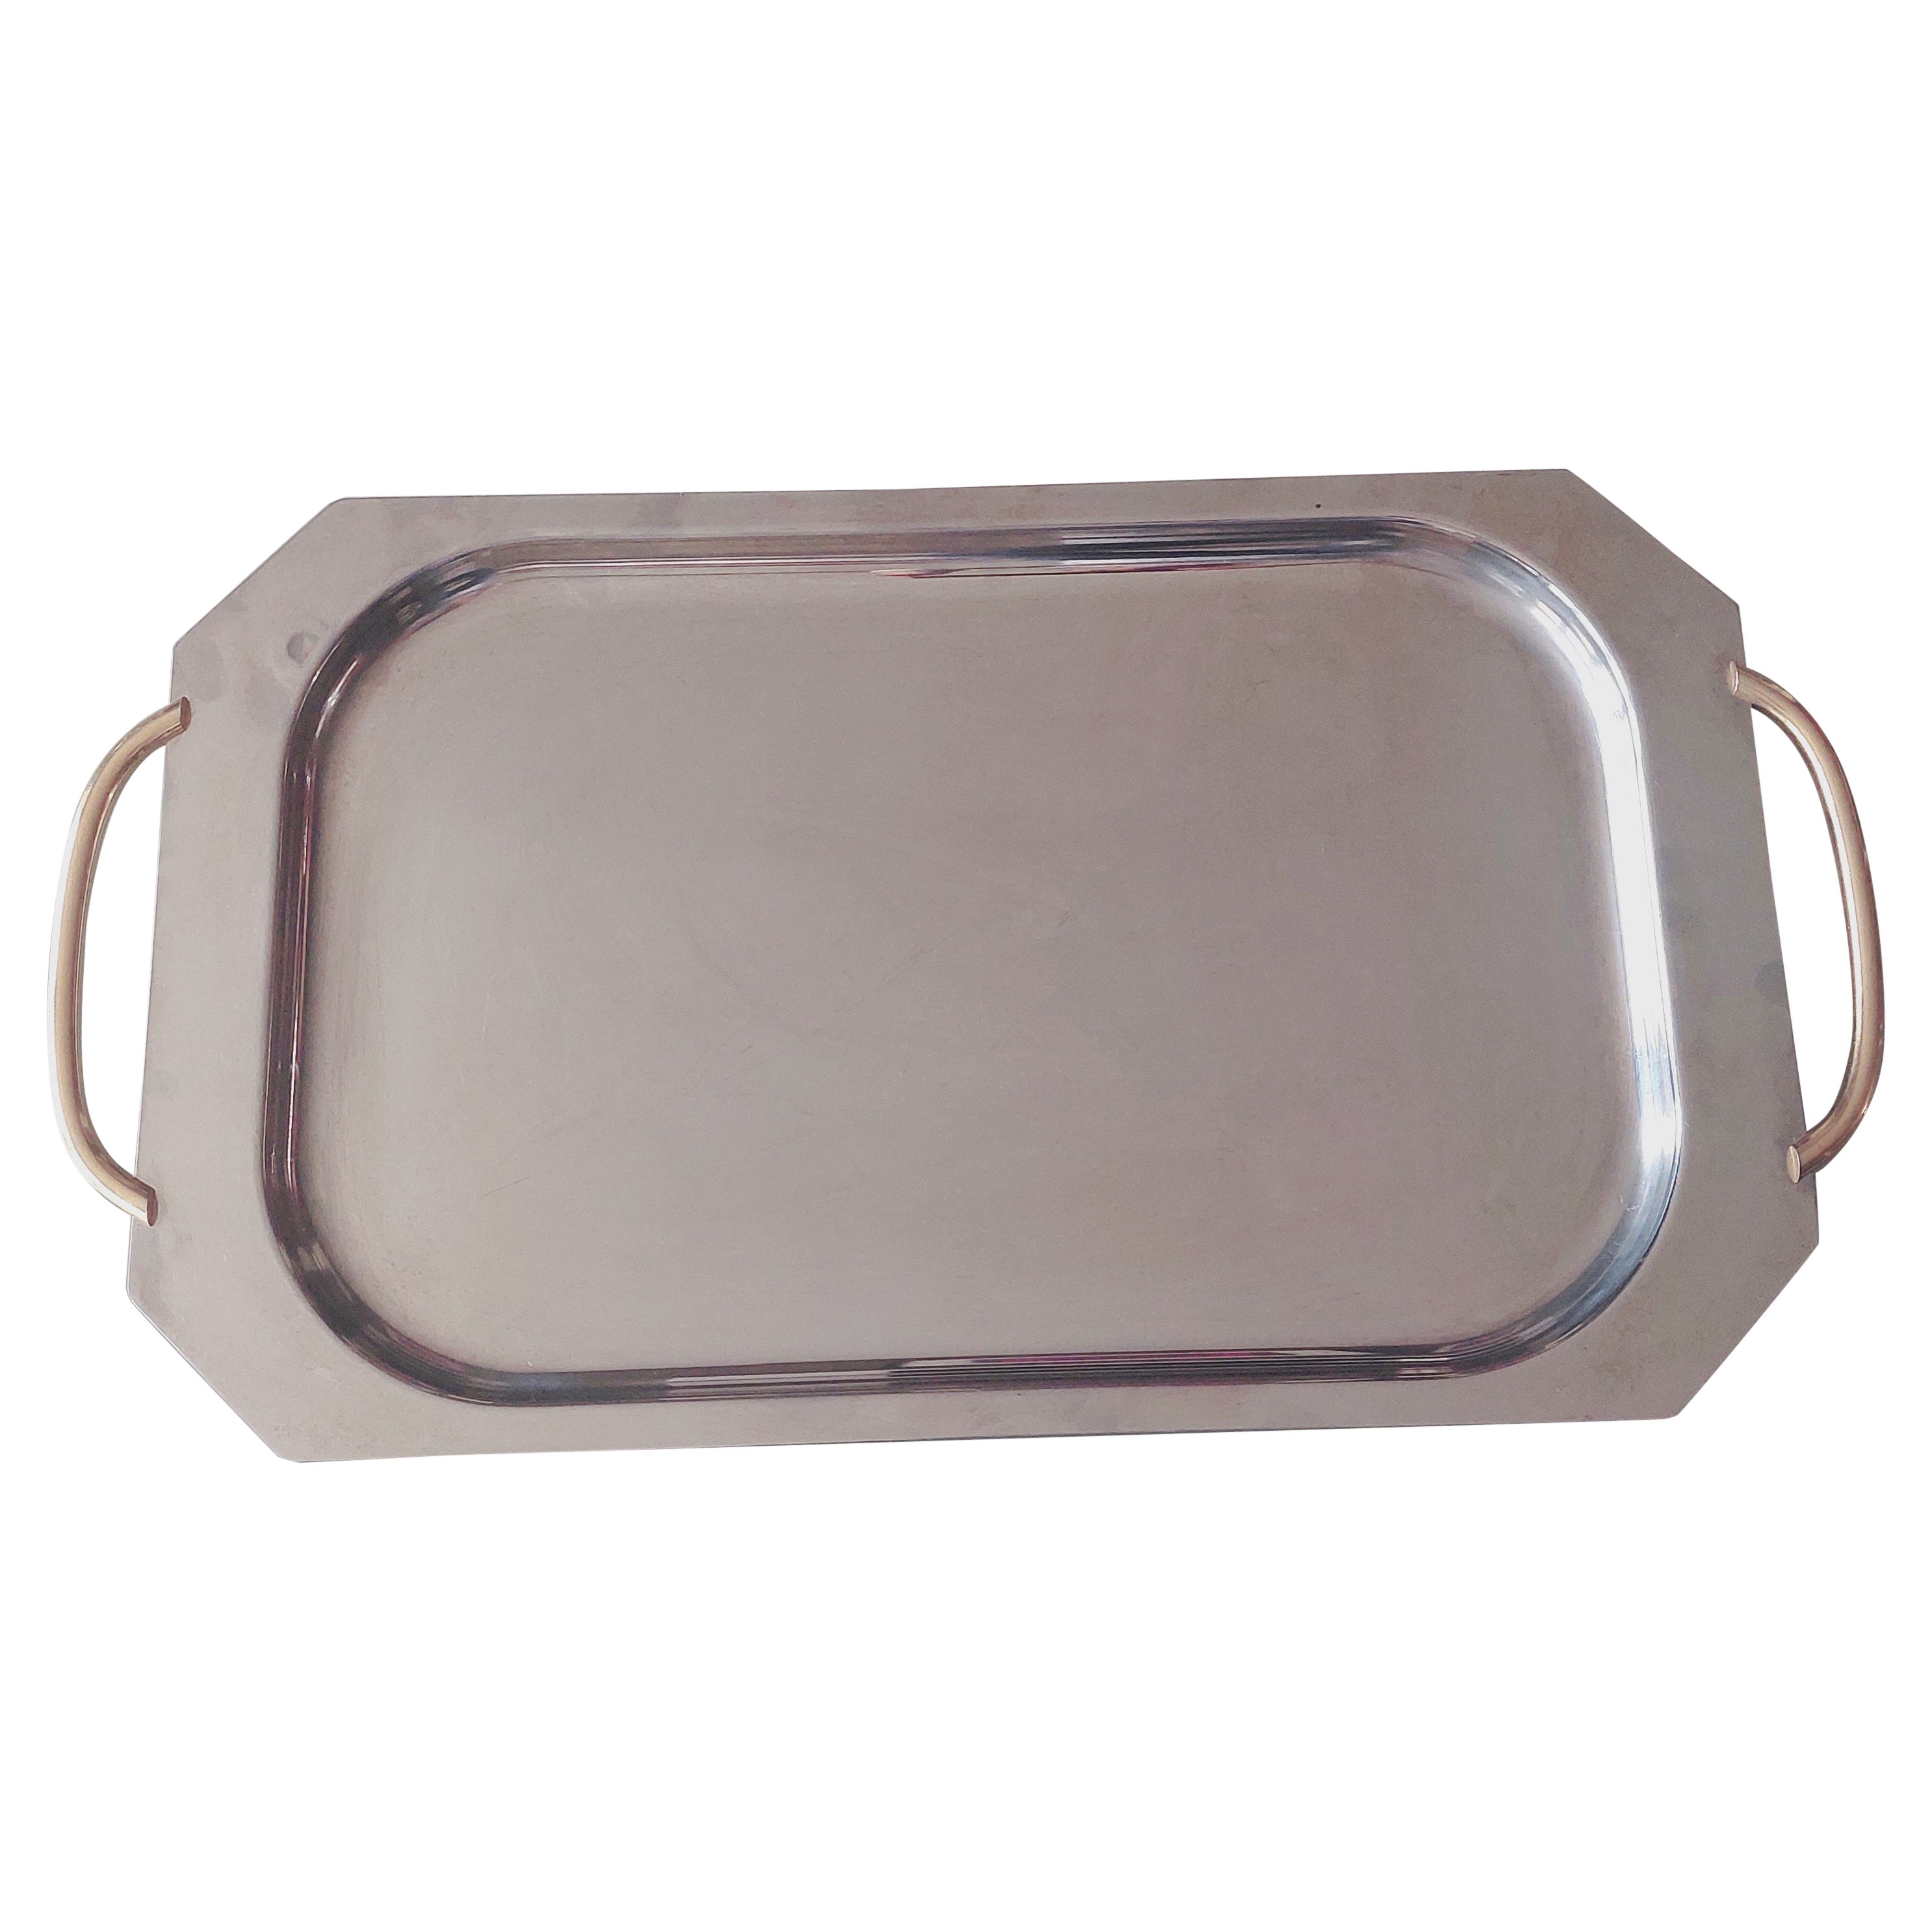 Rectangular Stainles Steel Centerpiece Serving Tray, Inox 18/10 Tsl, Italy, 1970 For Sale